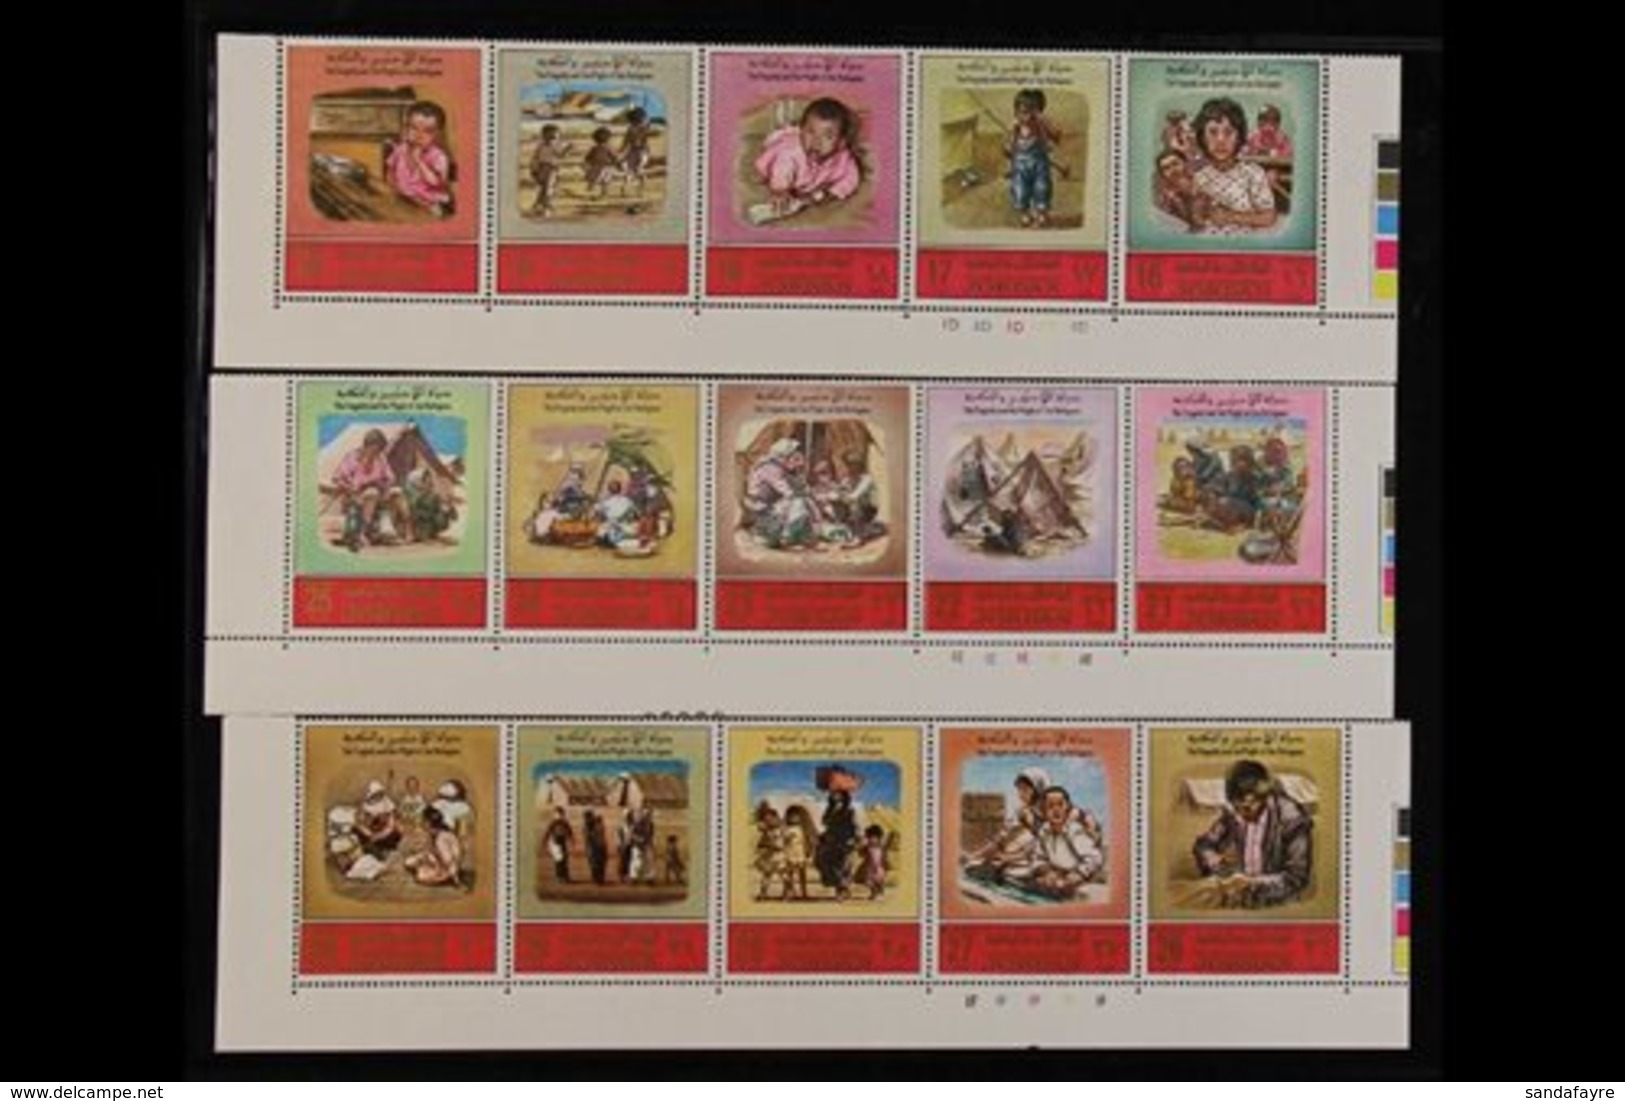 1969 'Tragedy Of The Refugees' And 'Tragedy In The Holy Lands' Complete Sets, SG 853/82 & 883/912, Superb Never Hinged M - Jordan